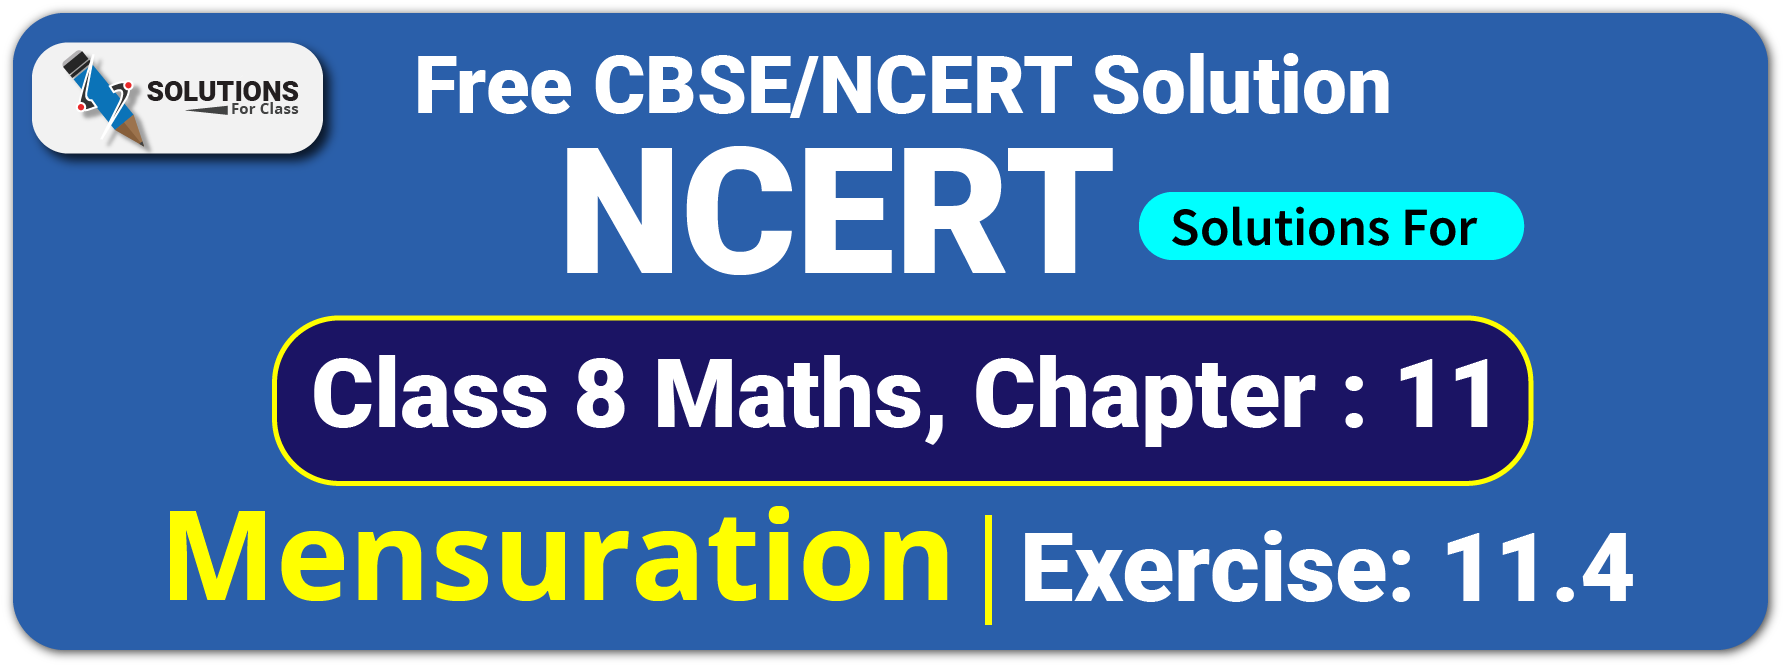 NCERT Solutions For Class 8 Chapter 11, Mensuration, Exercise.11.4